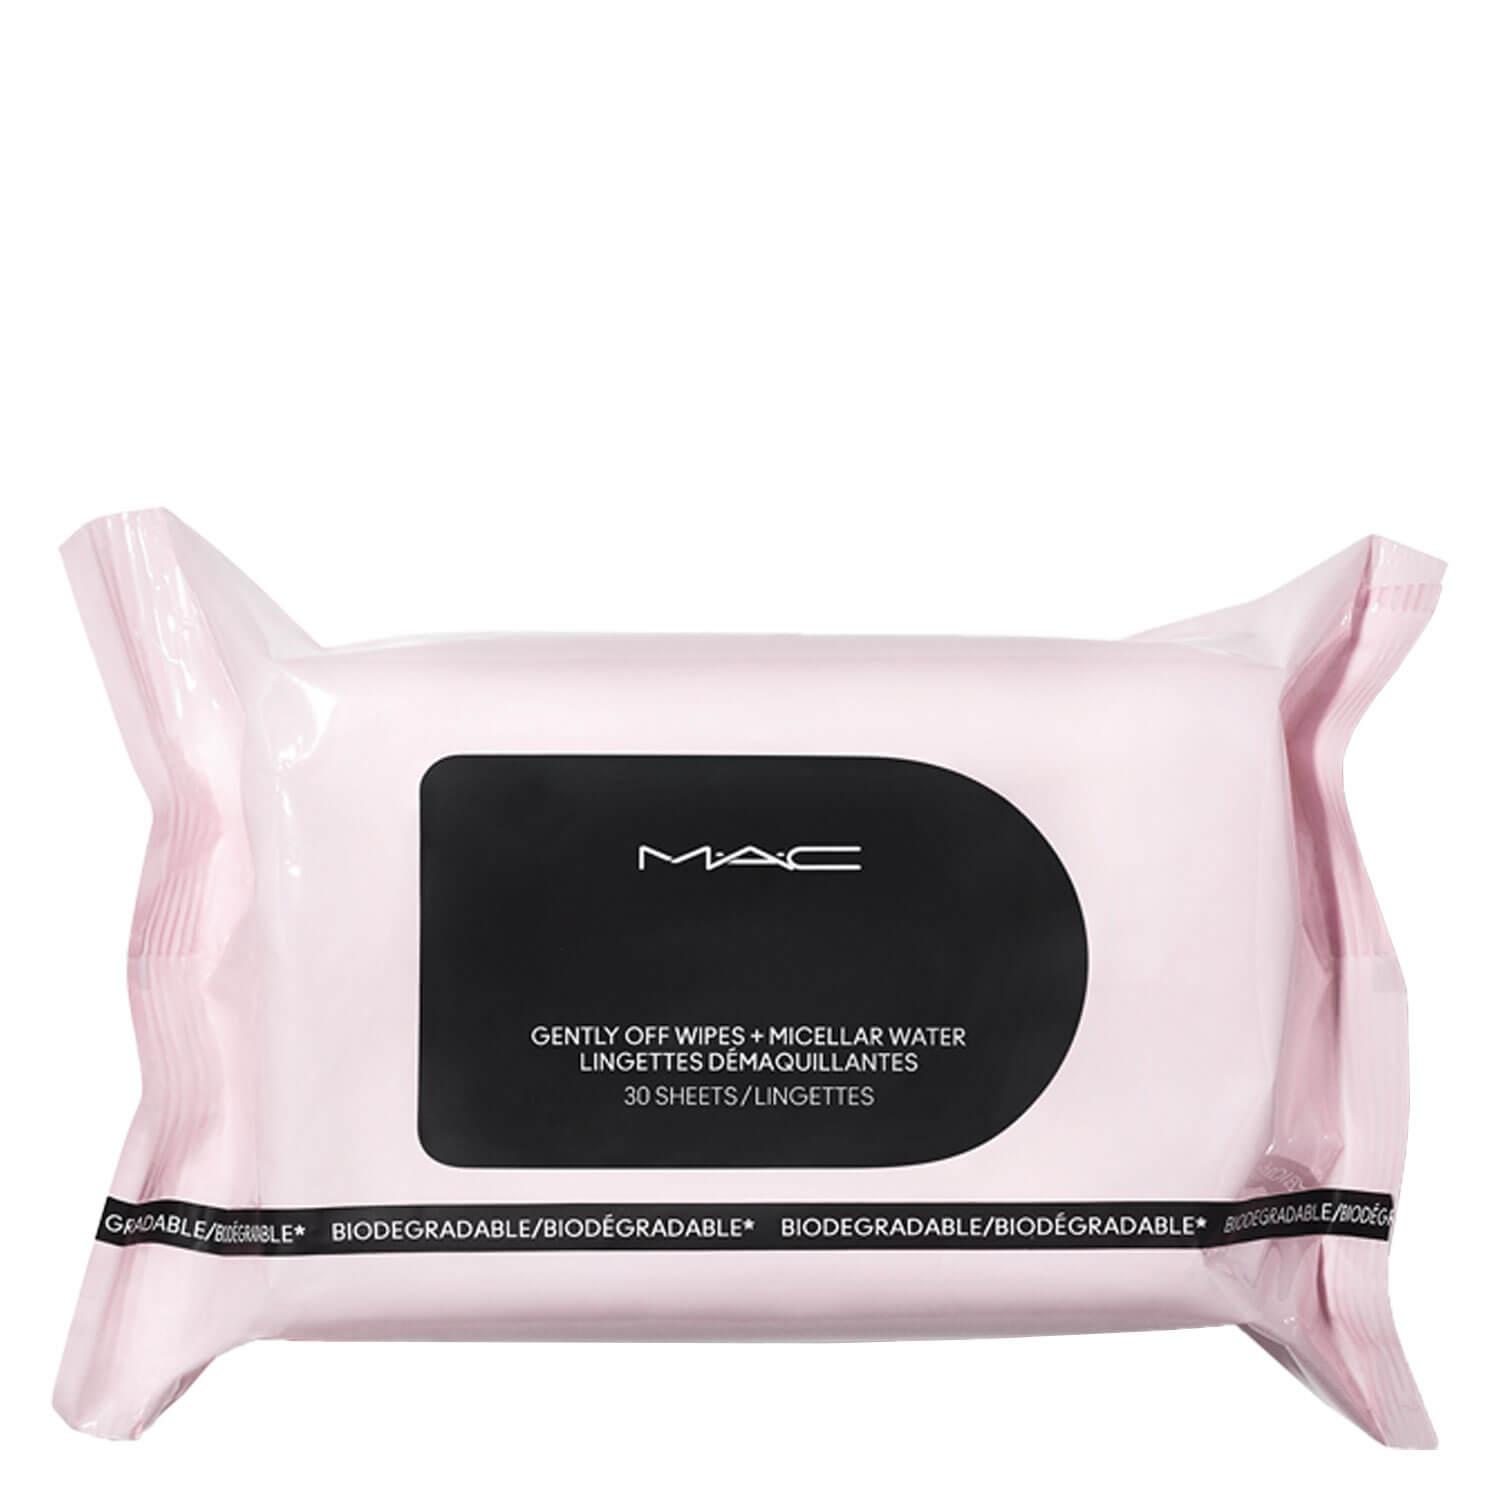 M·A·C Skin Care - Gently Off Wipes + Micellar Water